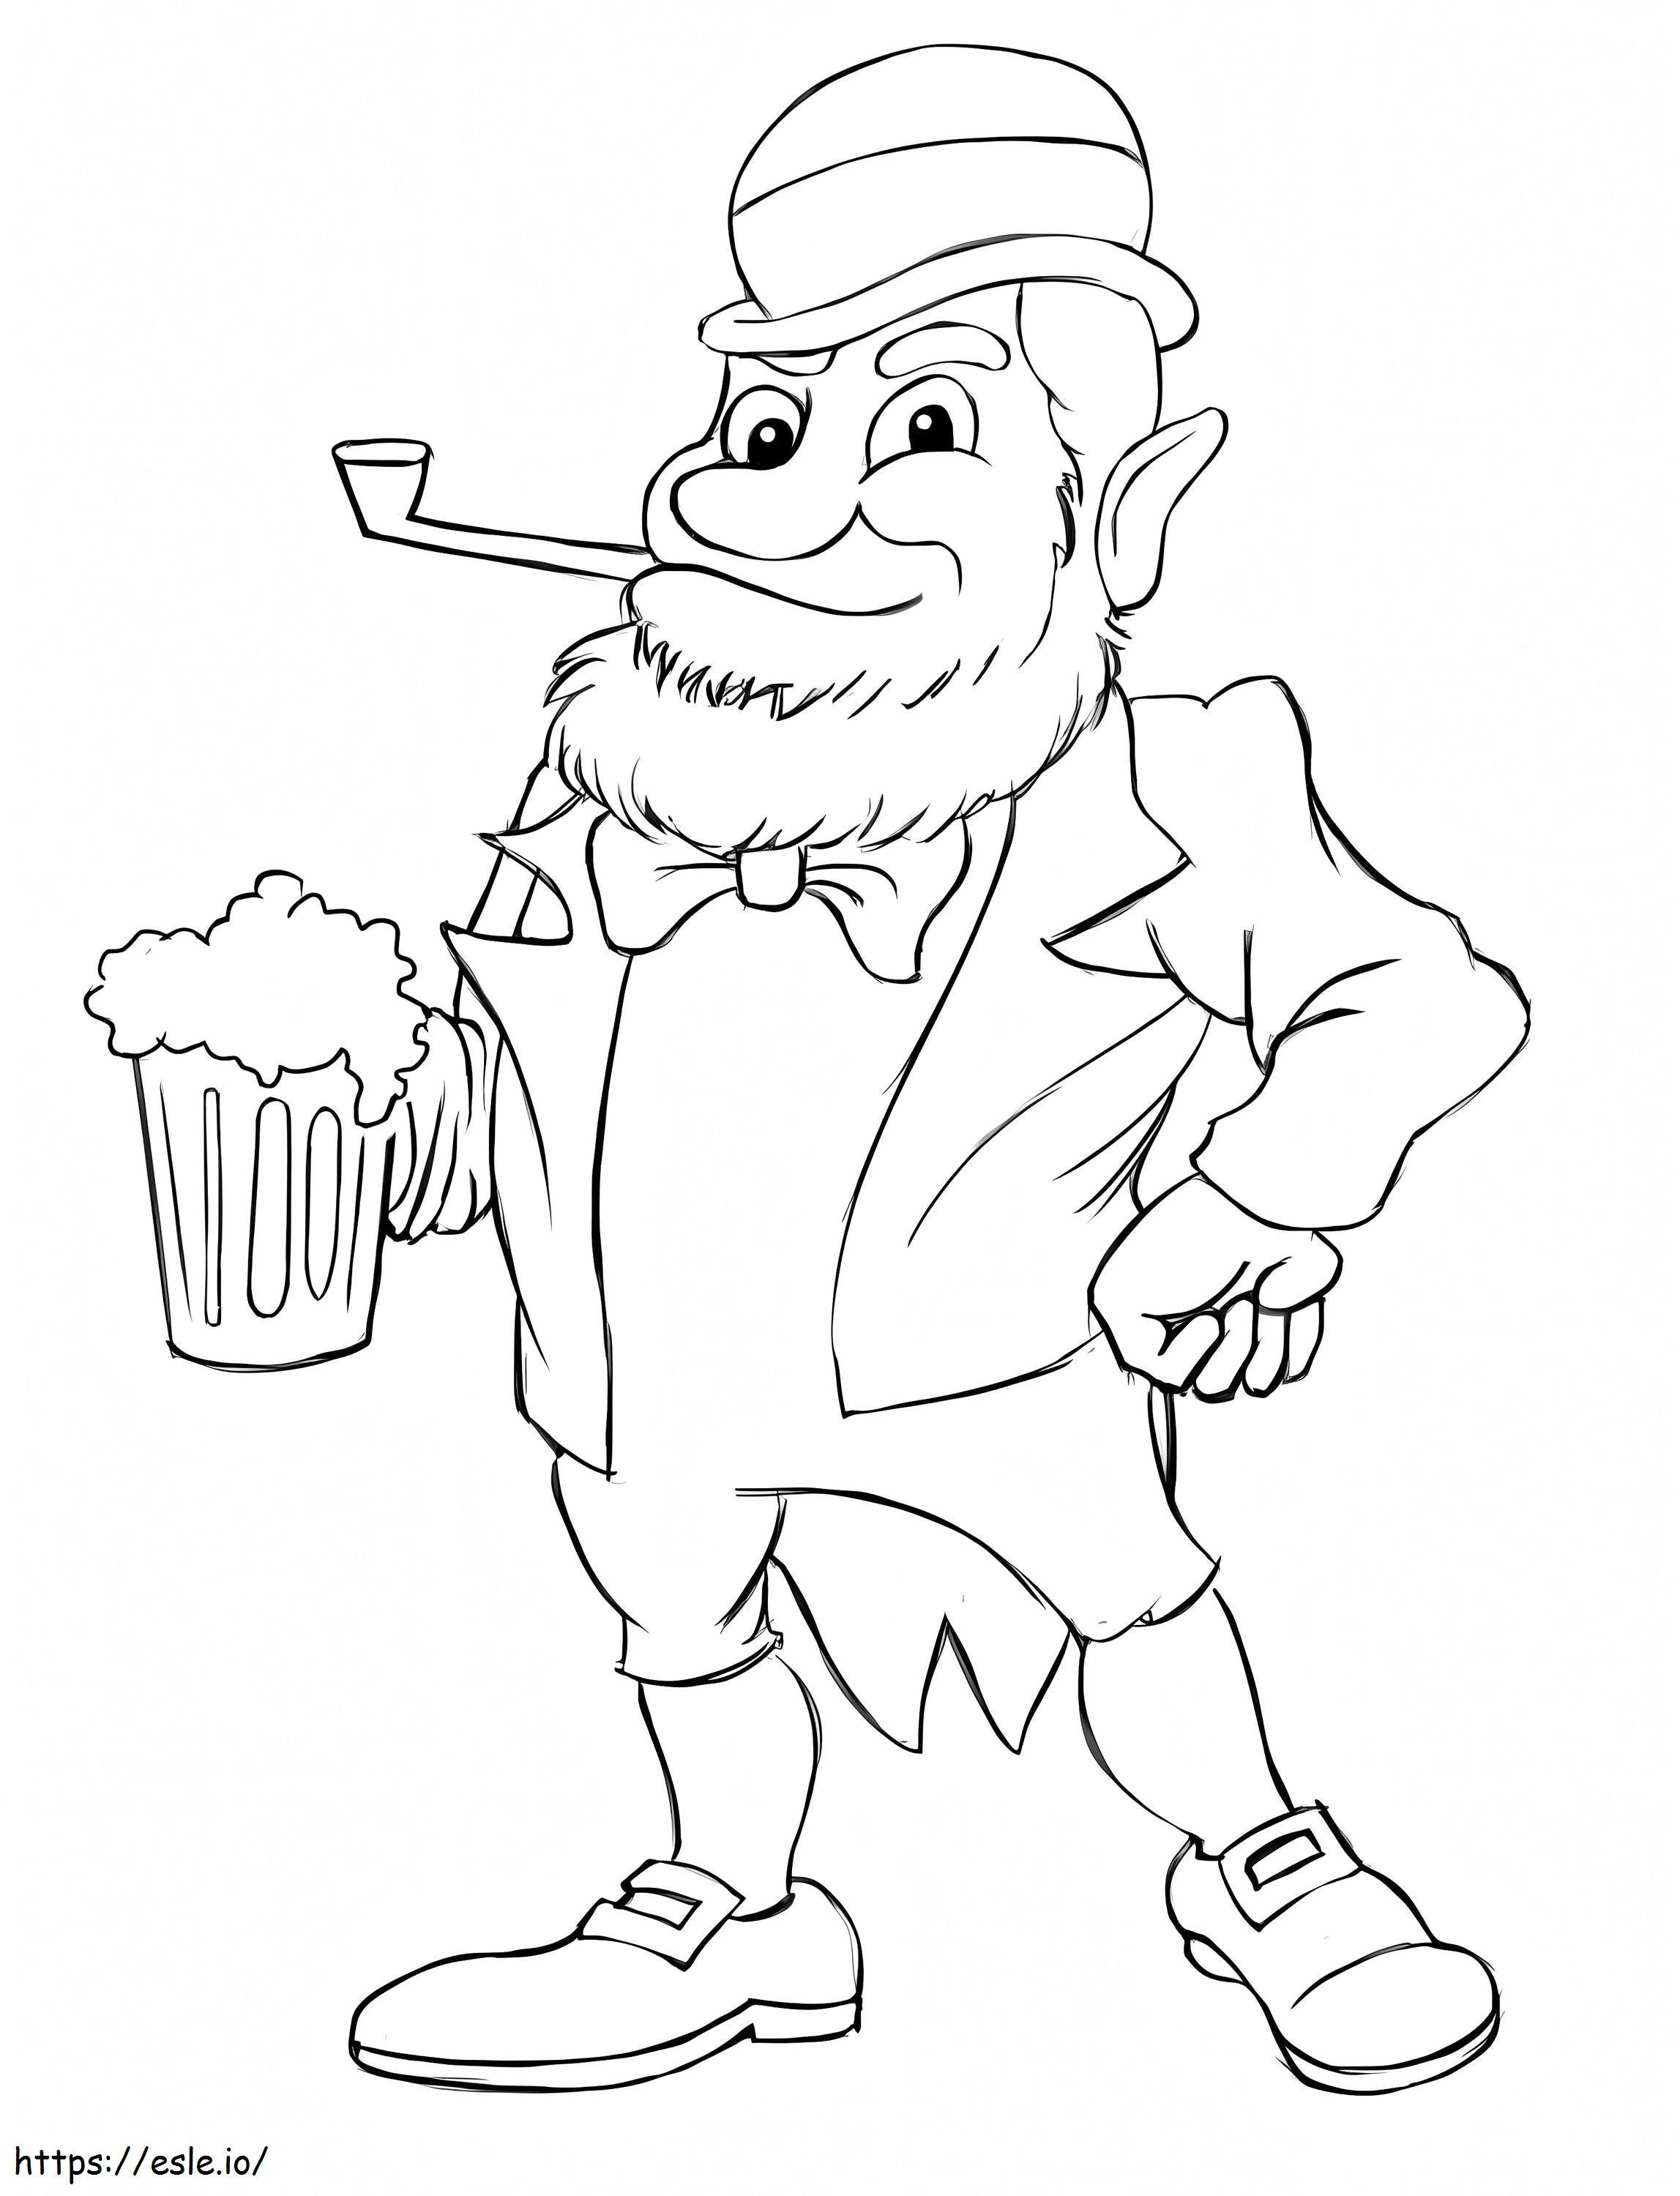 Leprechaun With Beer coloring page